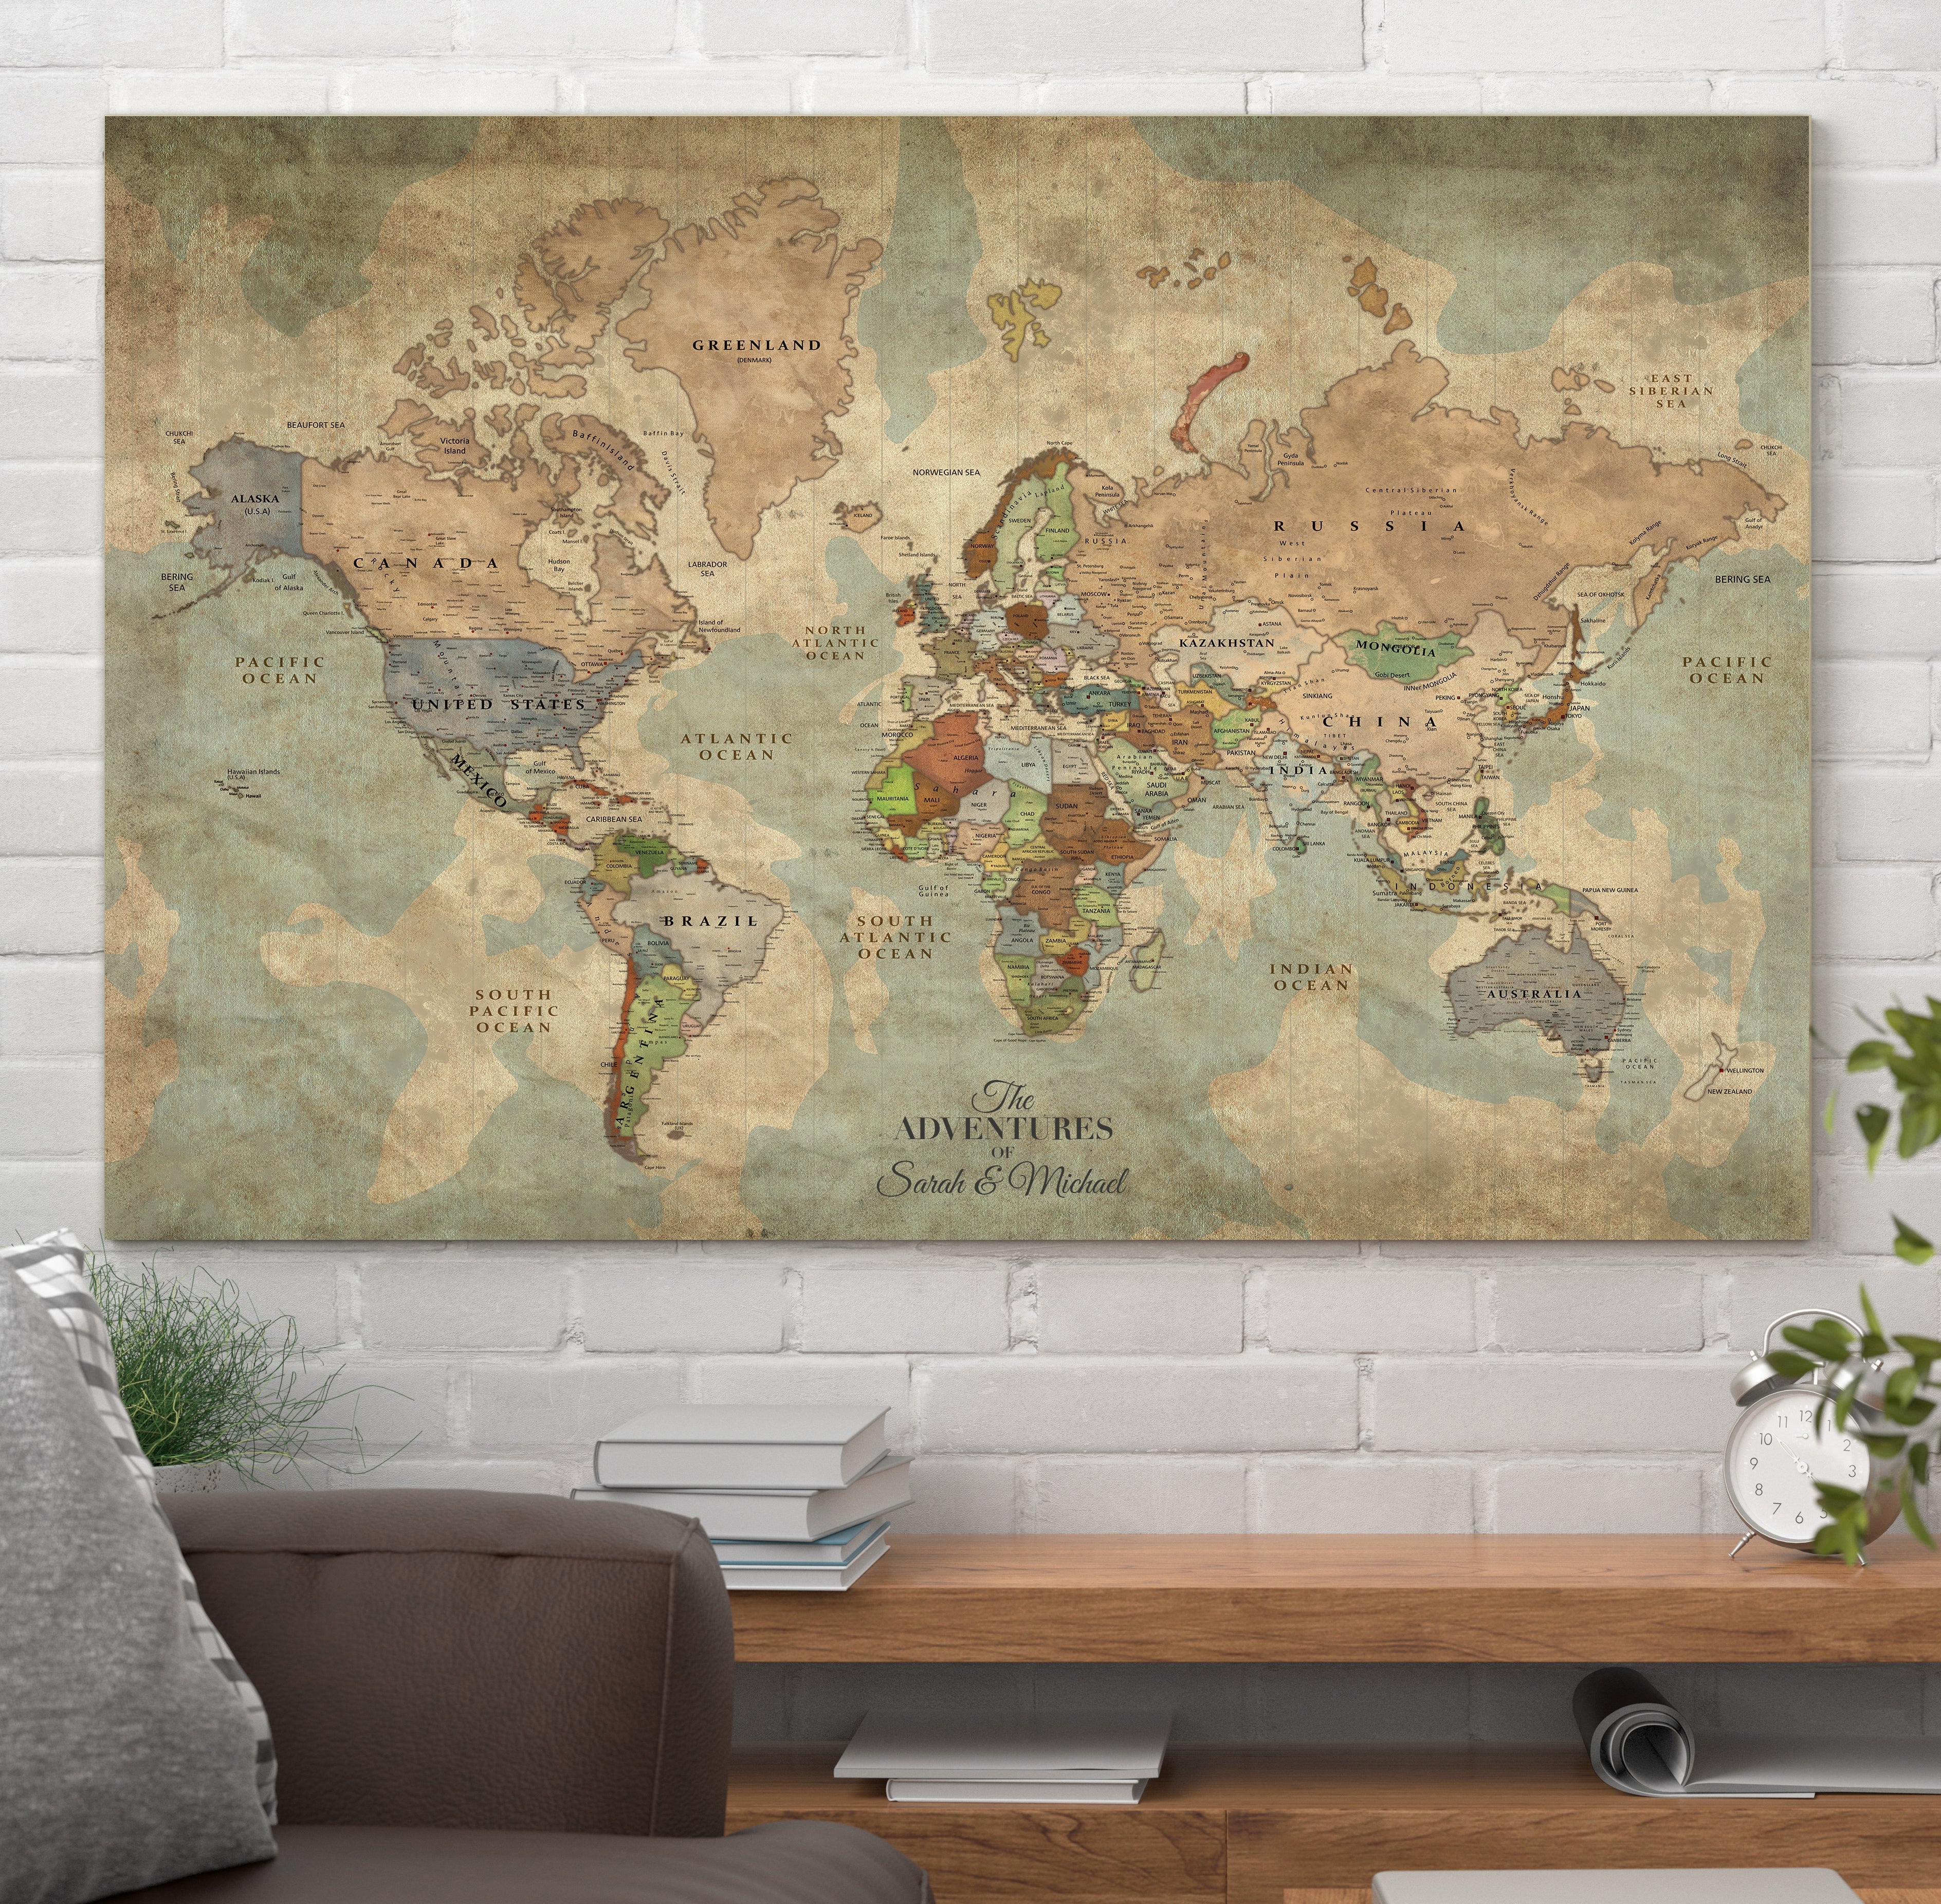 Personalized Push Pin World Map Wall Art Canvas Print - Custom World Map - Detailed Map of World Artwork - Ready to Hang Travelled World Map-D14